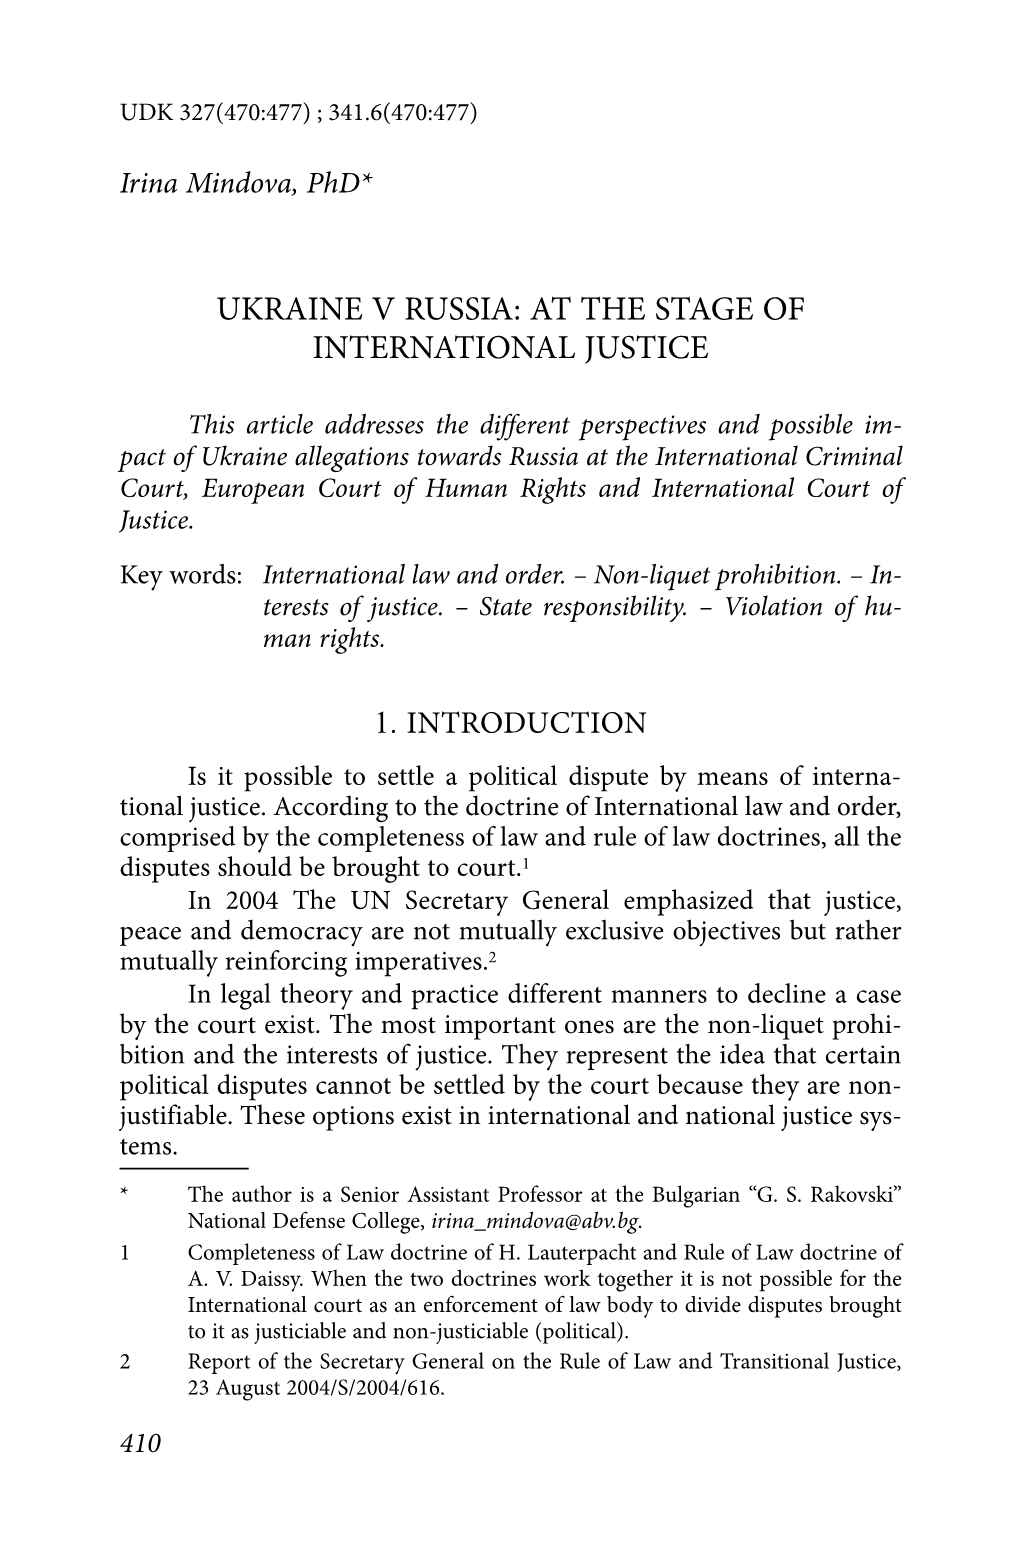 Ukraine V Russia: at the Stage of International Justice